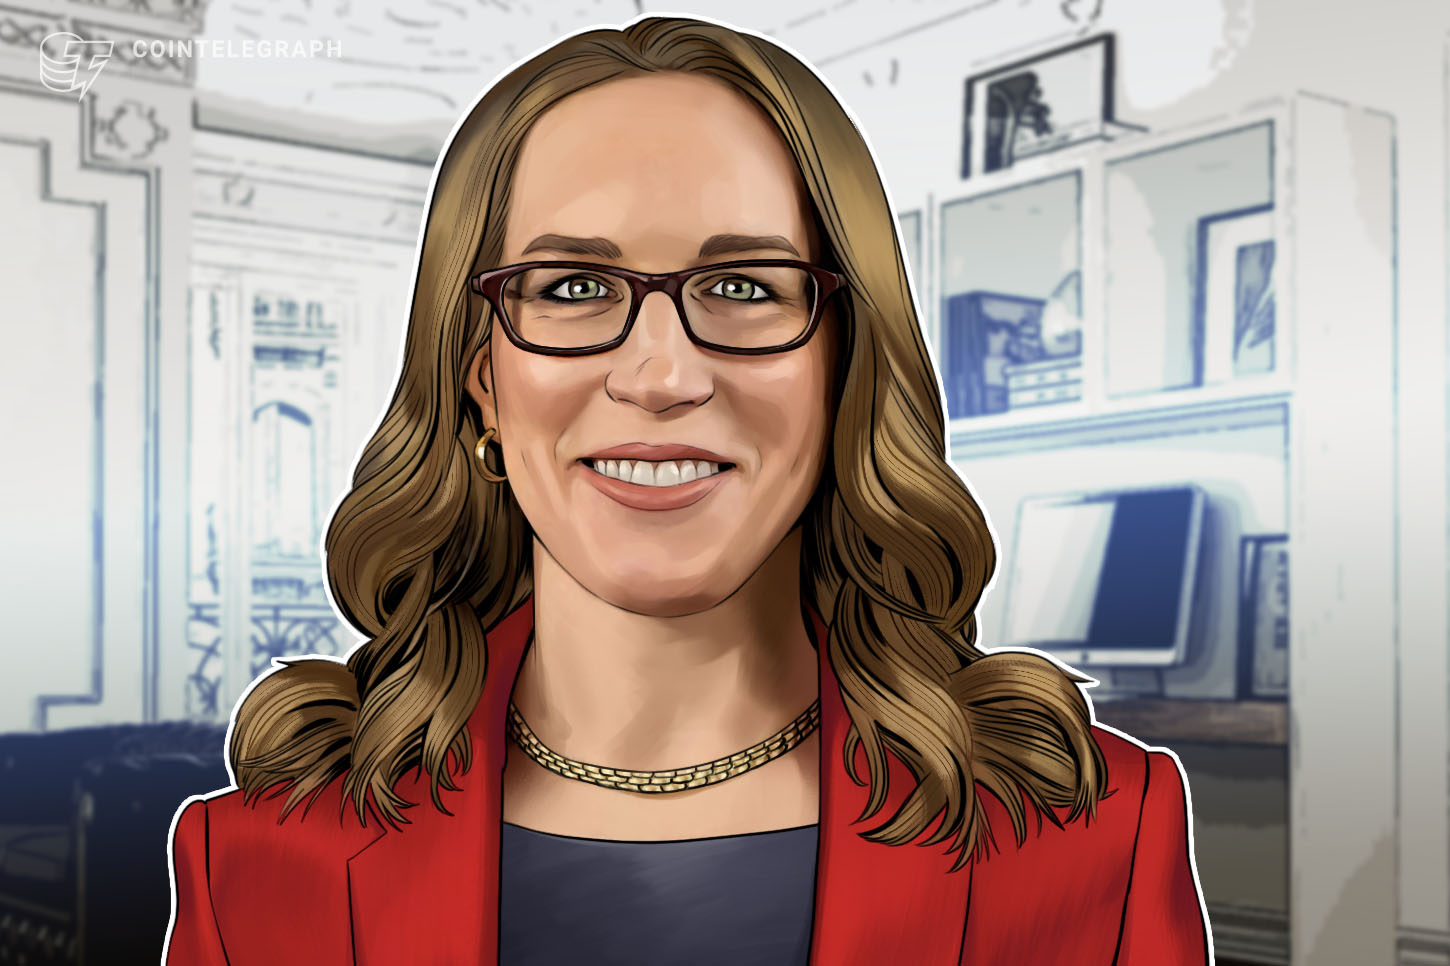 ‘New guidelines’ for SEC may comply with instance set by Wyoming, says Hester Peirce